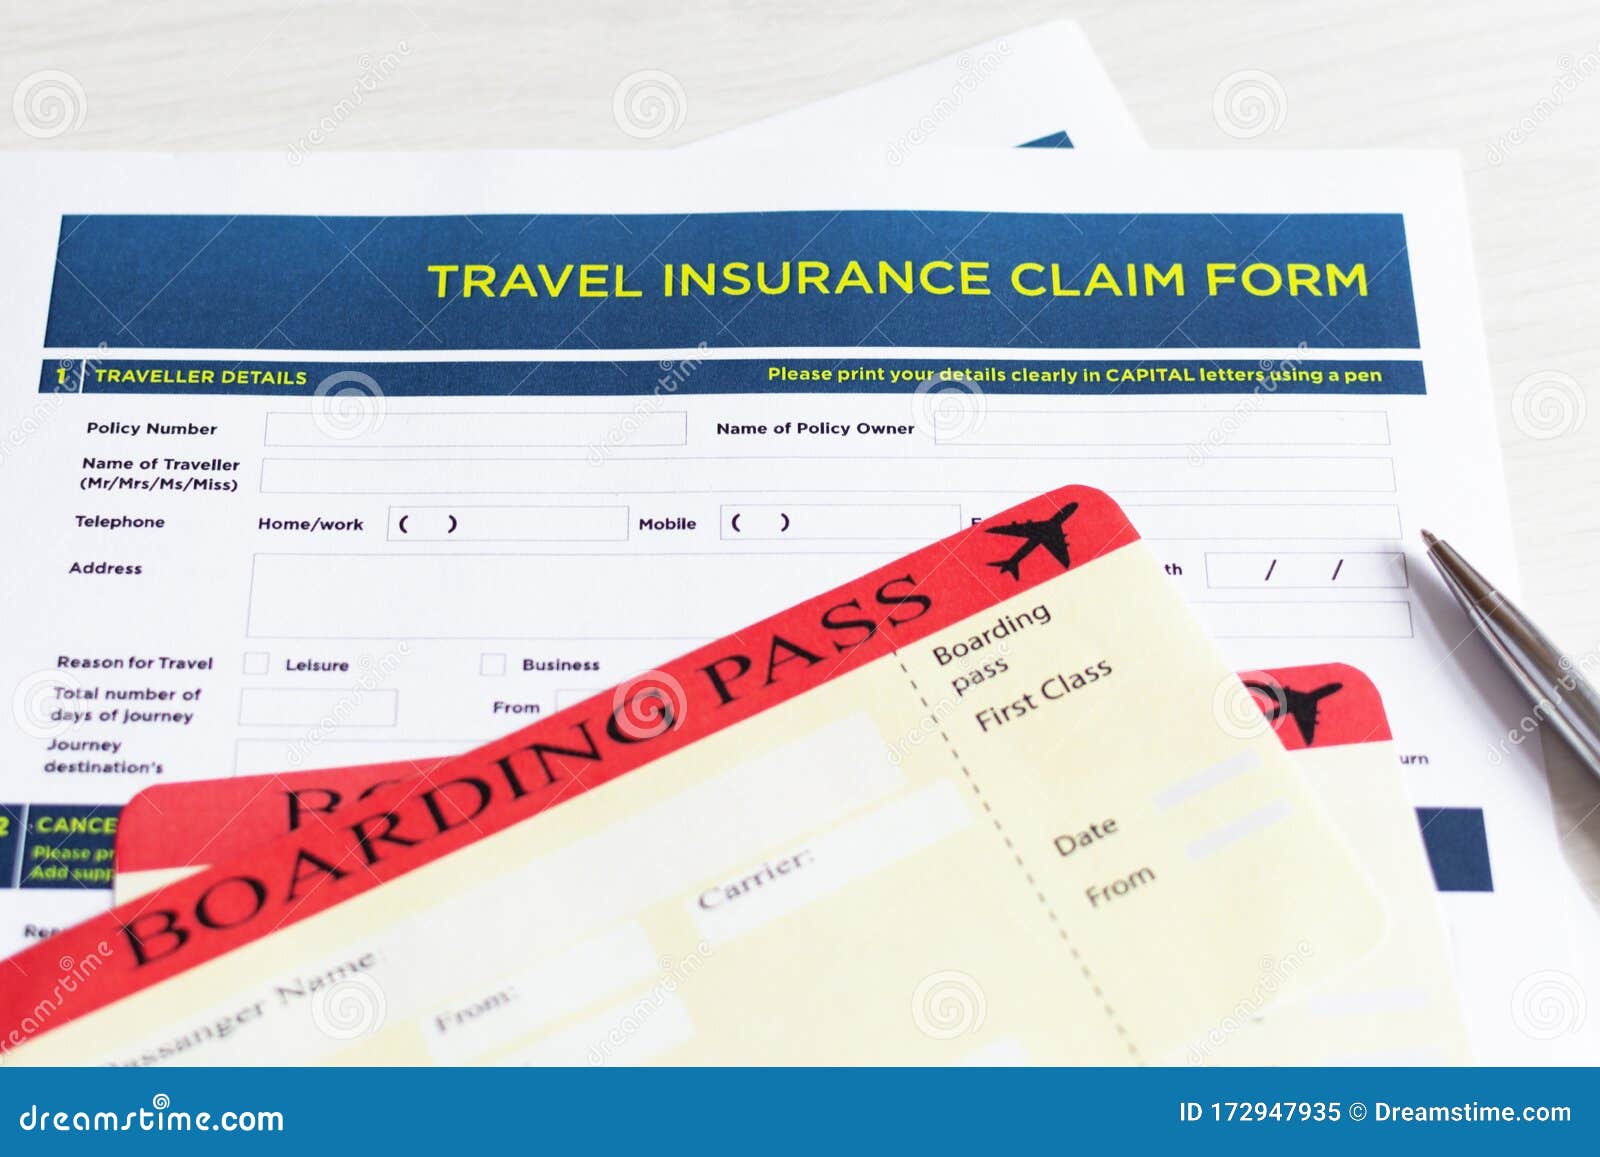 travel-insurance-policy-claim-form-board